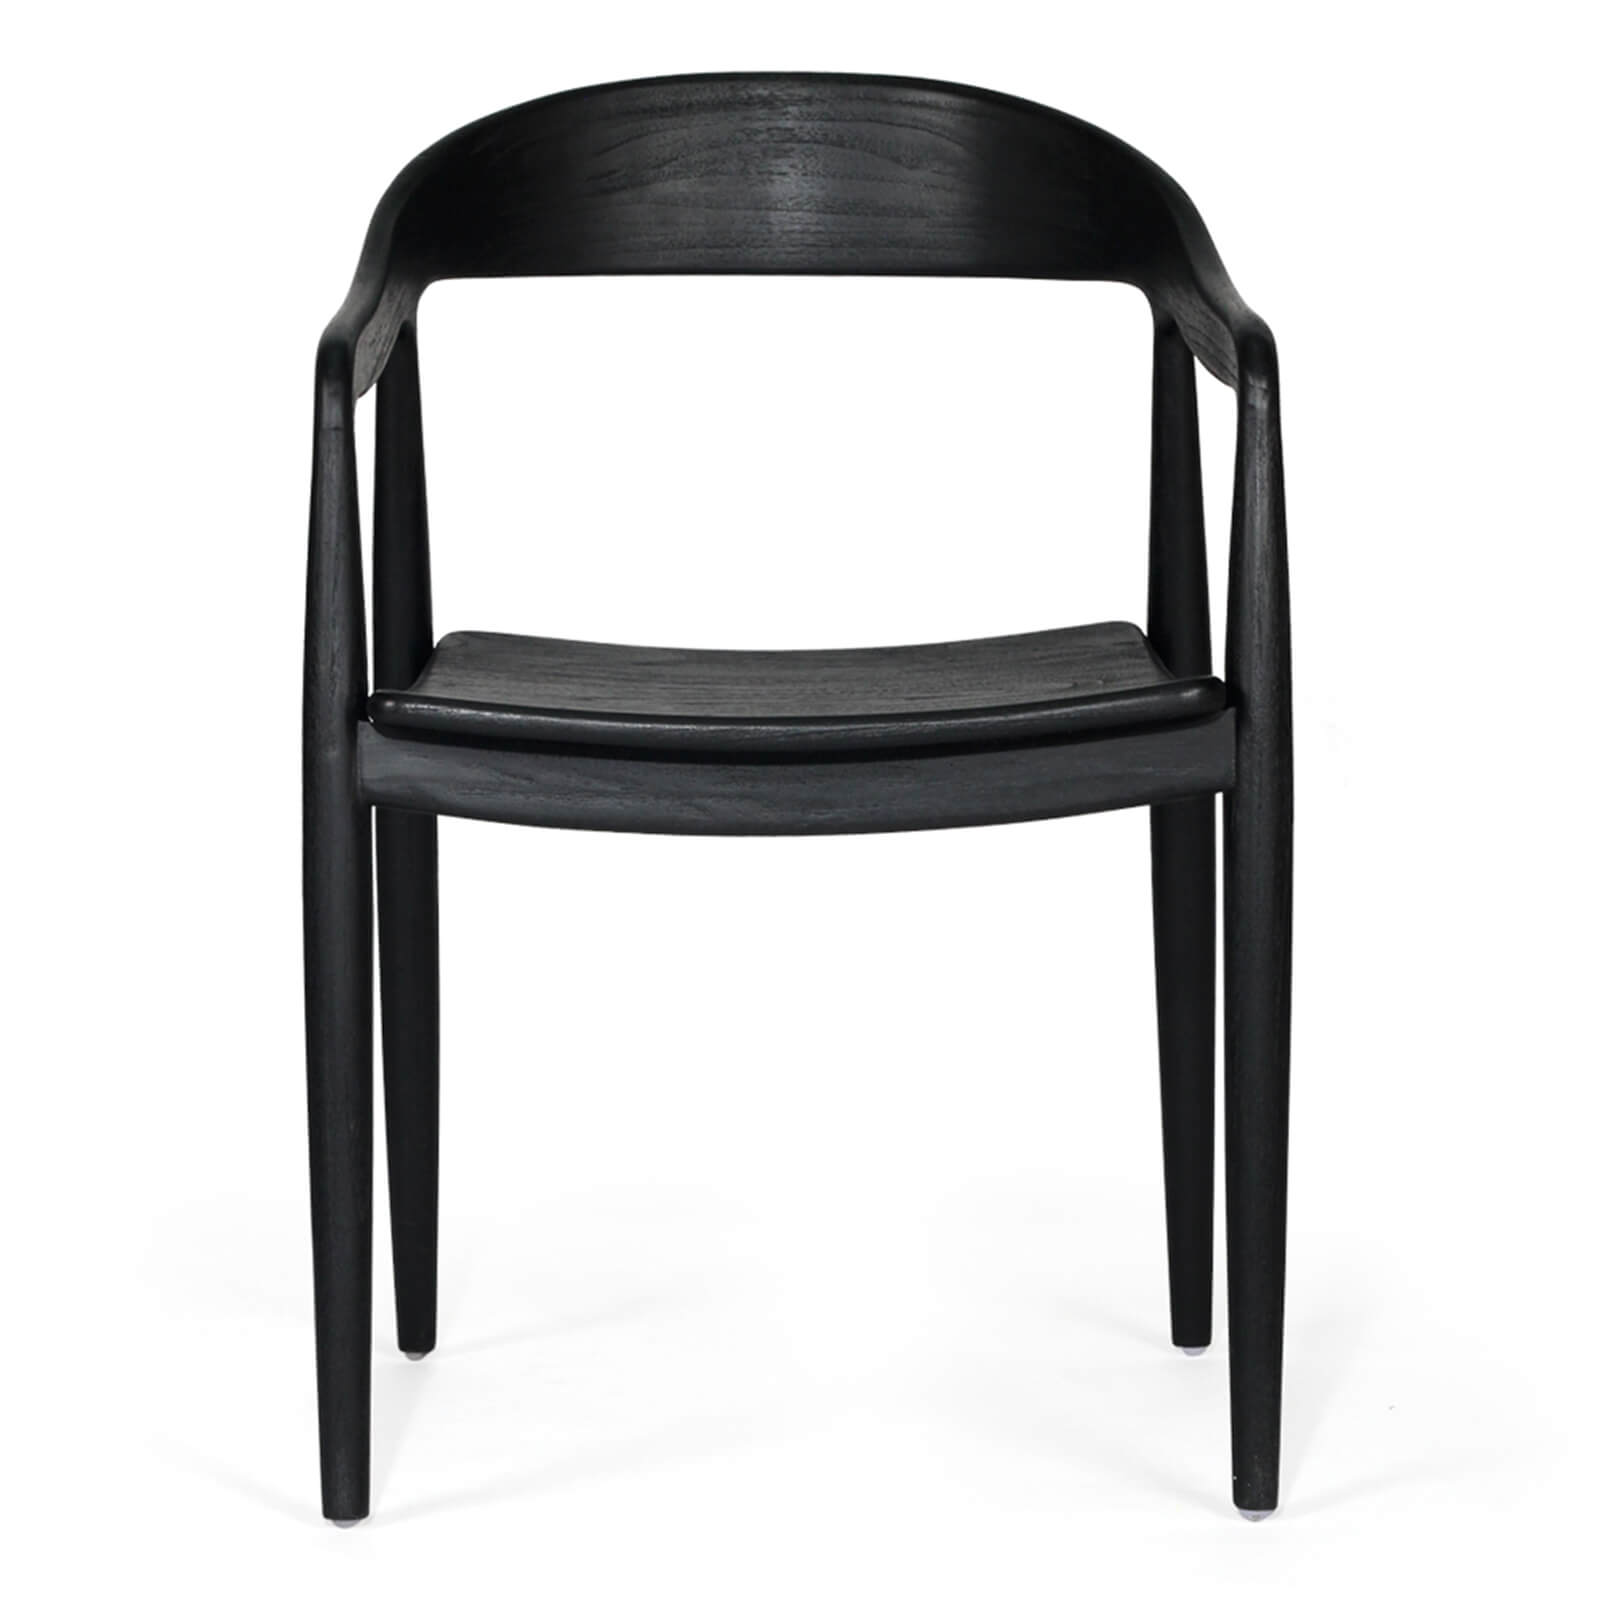 Laguna | Coastal Black Wooden Dining Chairs With Arms